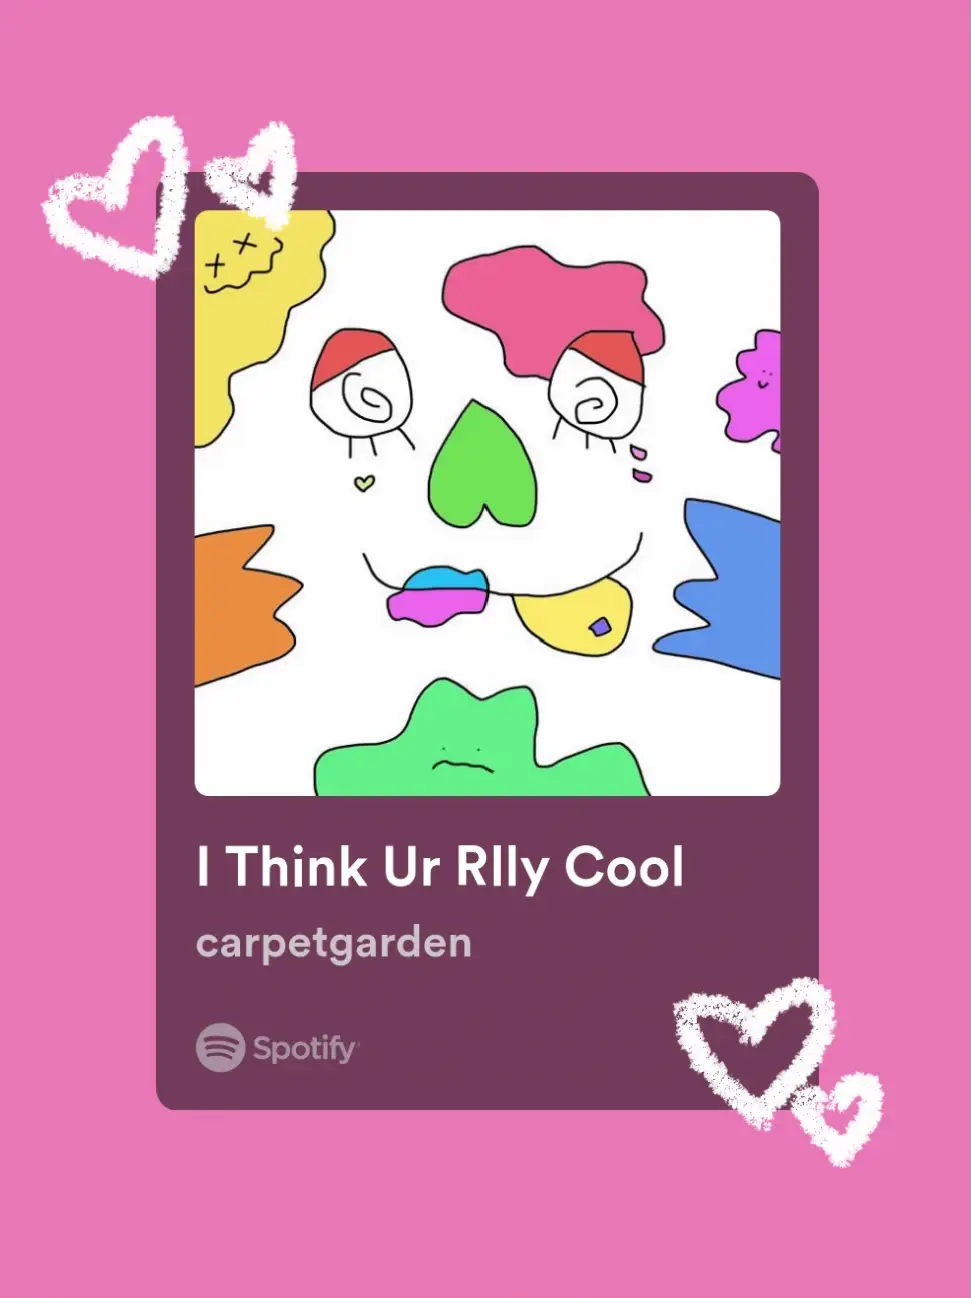  A Spotify ad with a cartoon face on it.